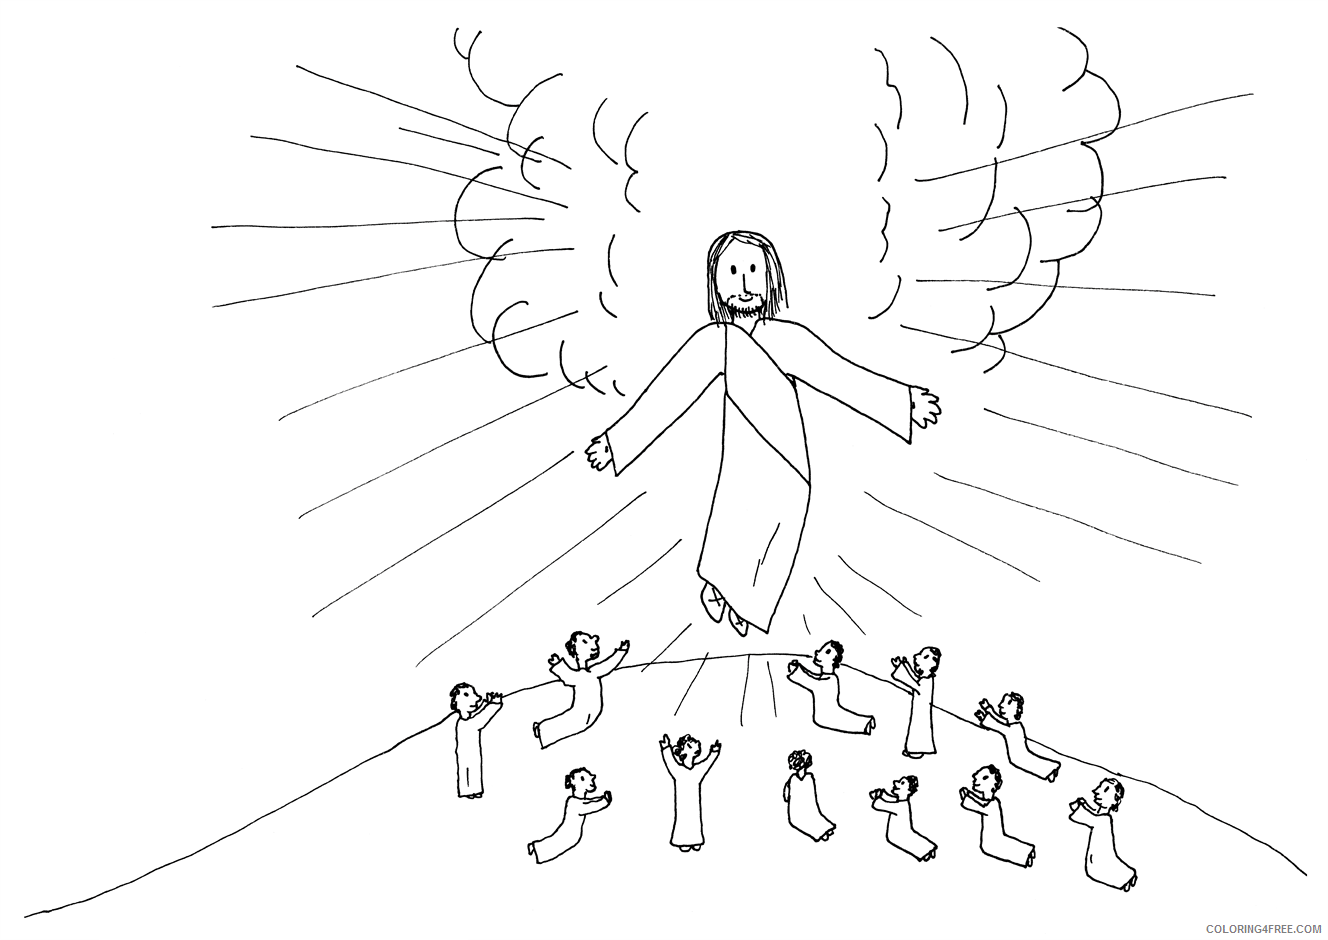 Ascension Coloring Page Printable Sheets Jesus Ascension For Children Related 2021 a 3323 Coloring4free